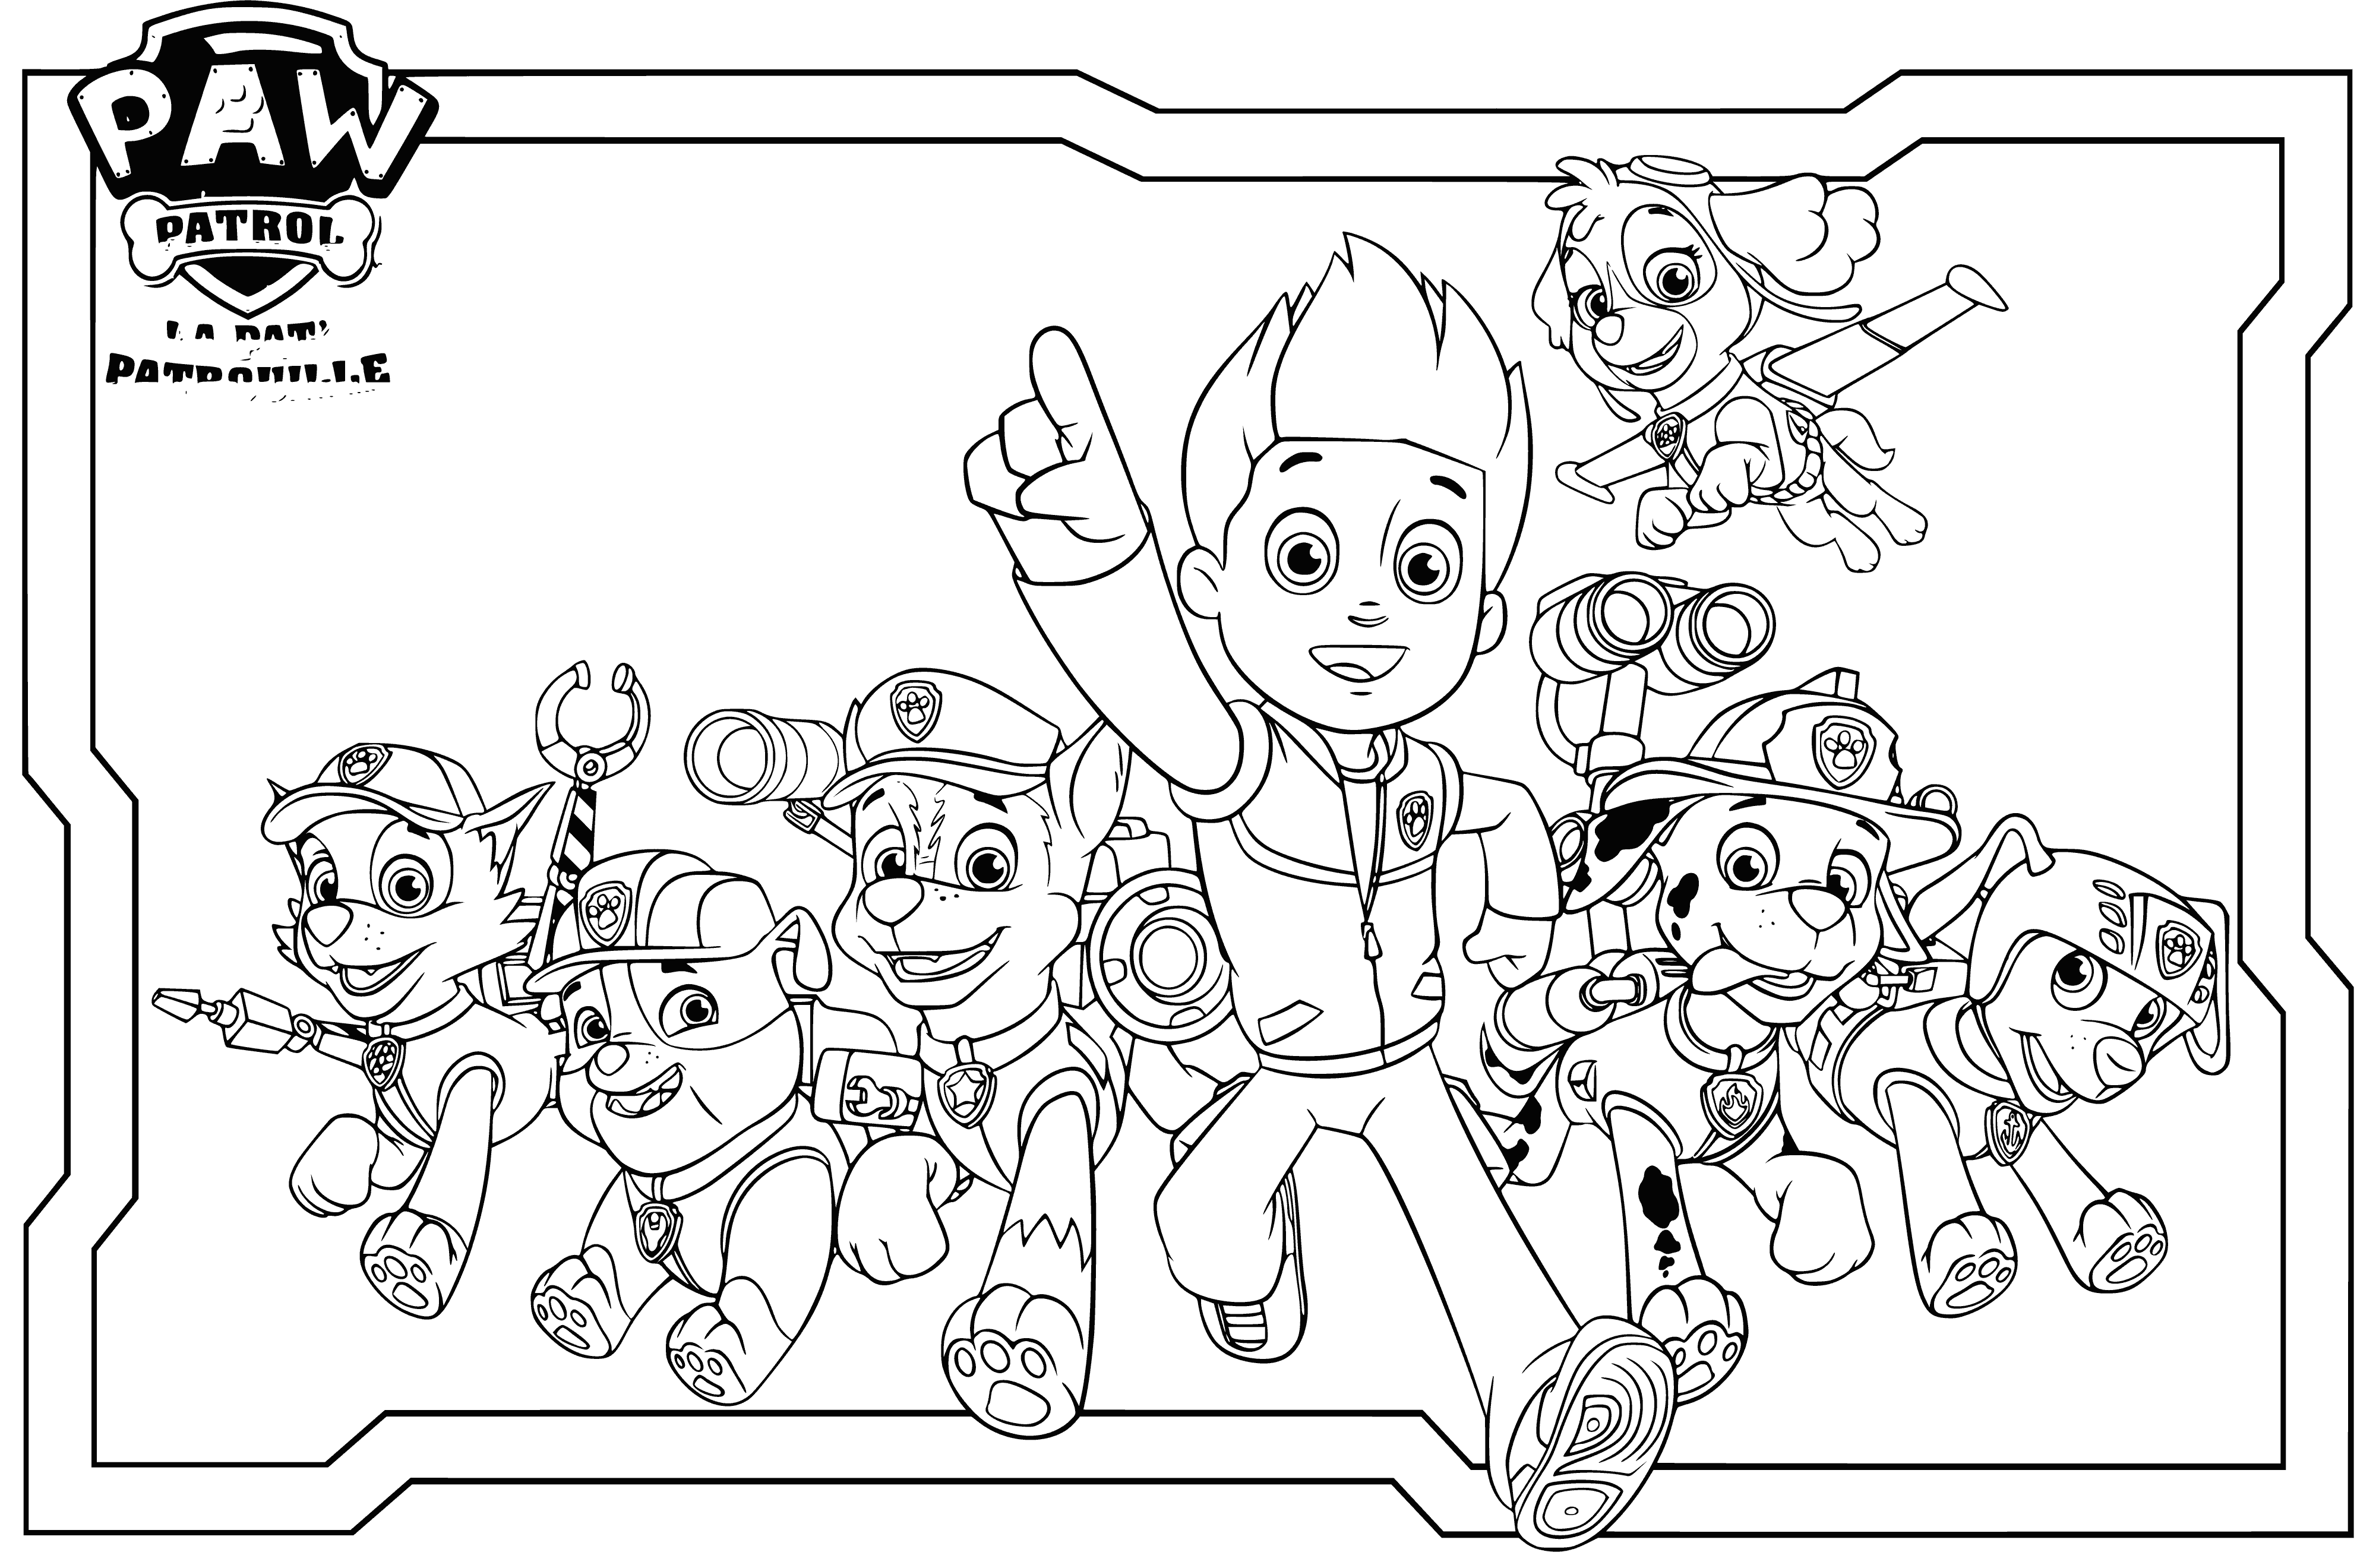 coloring page: Six puppies standing in formation, badges on each one. Seventh pup sitting down says "PUP PATROL!" #PuppyLove